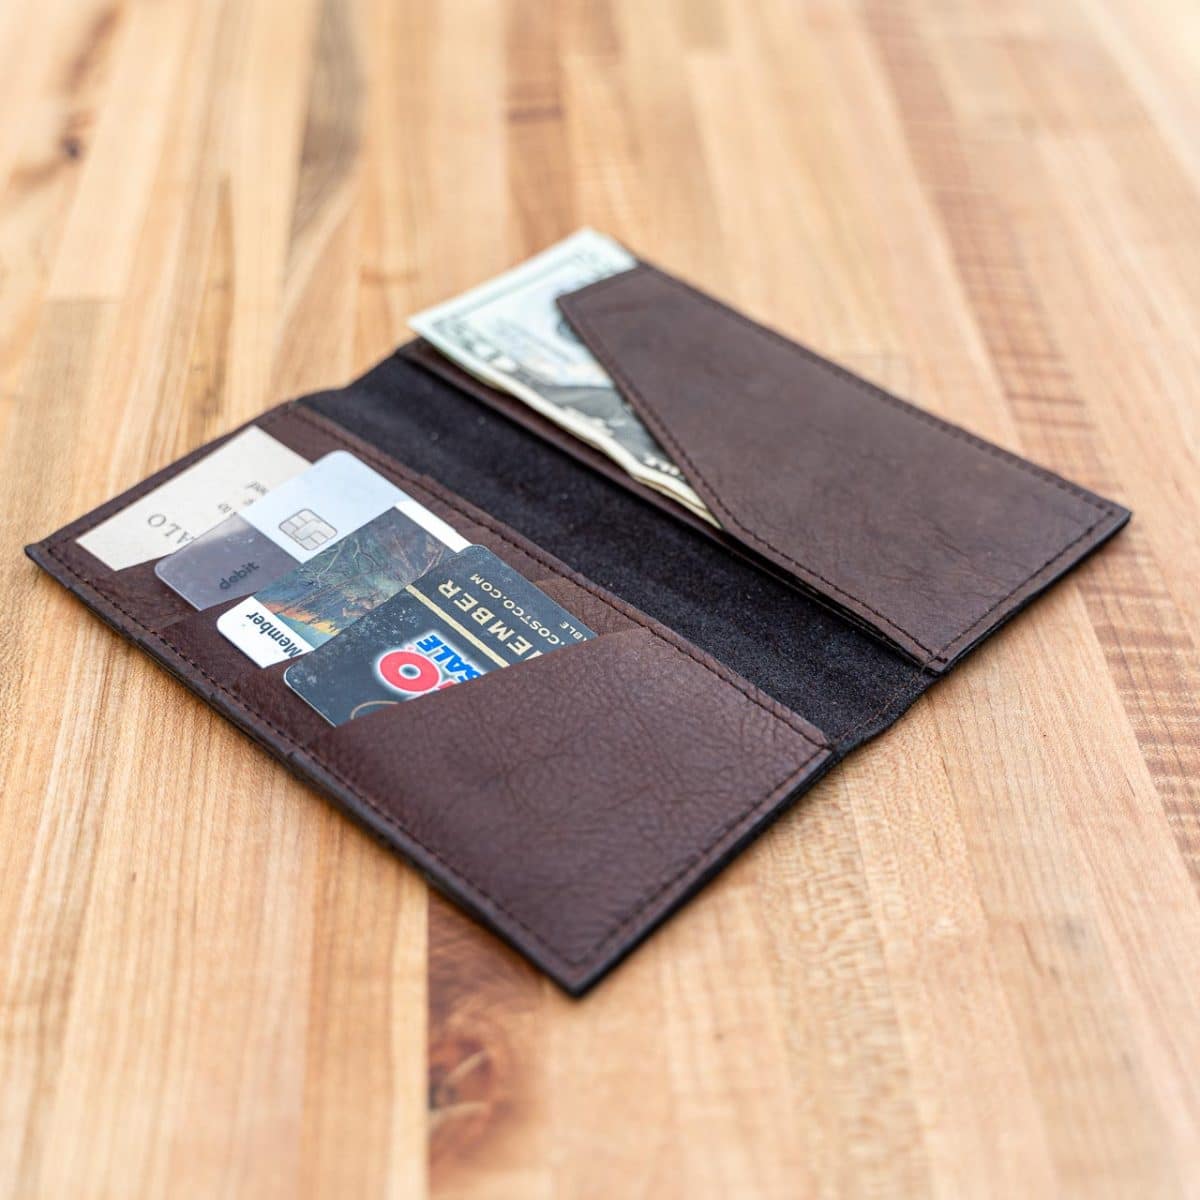 Designer Checkbook Covers & Leather Checkbook Covers